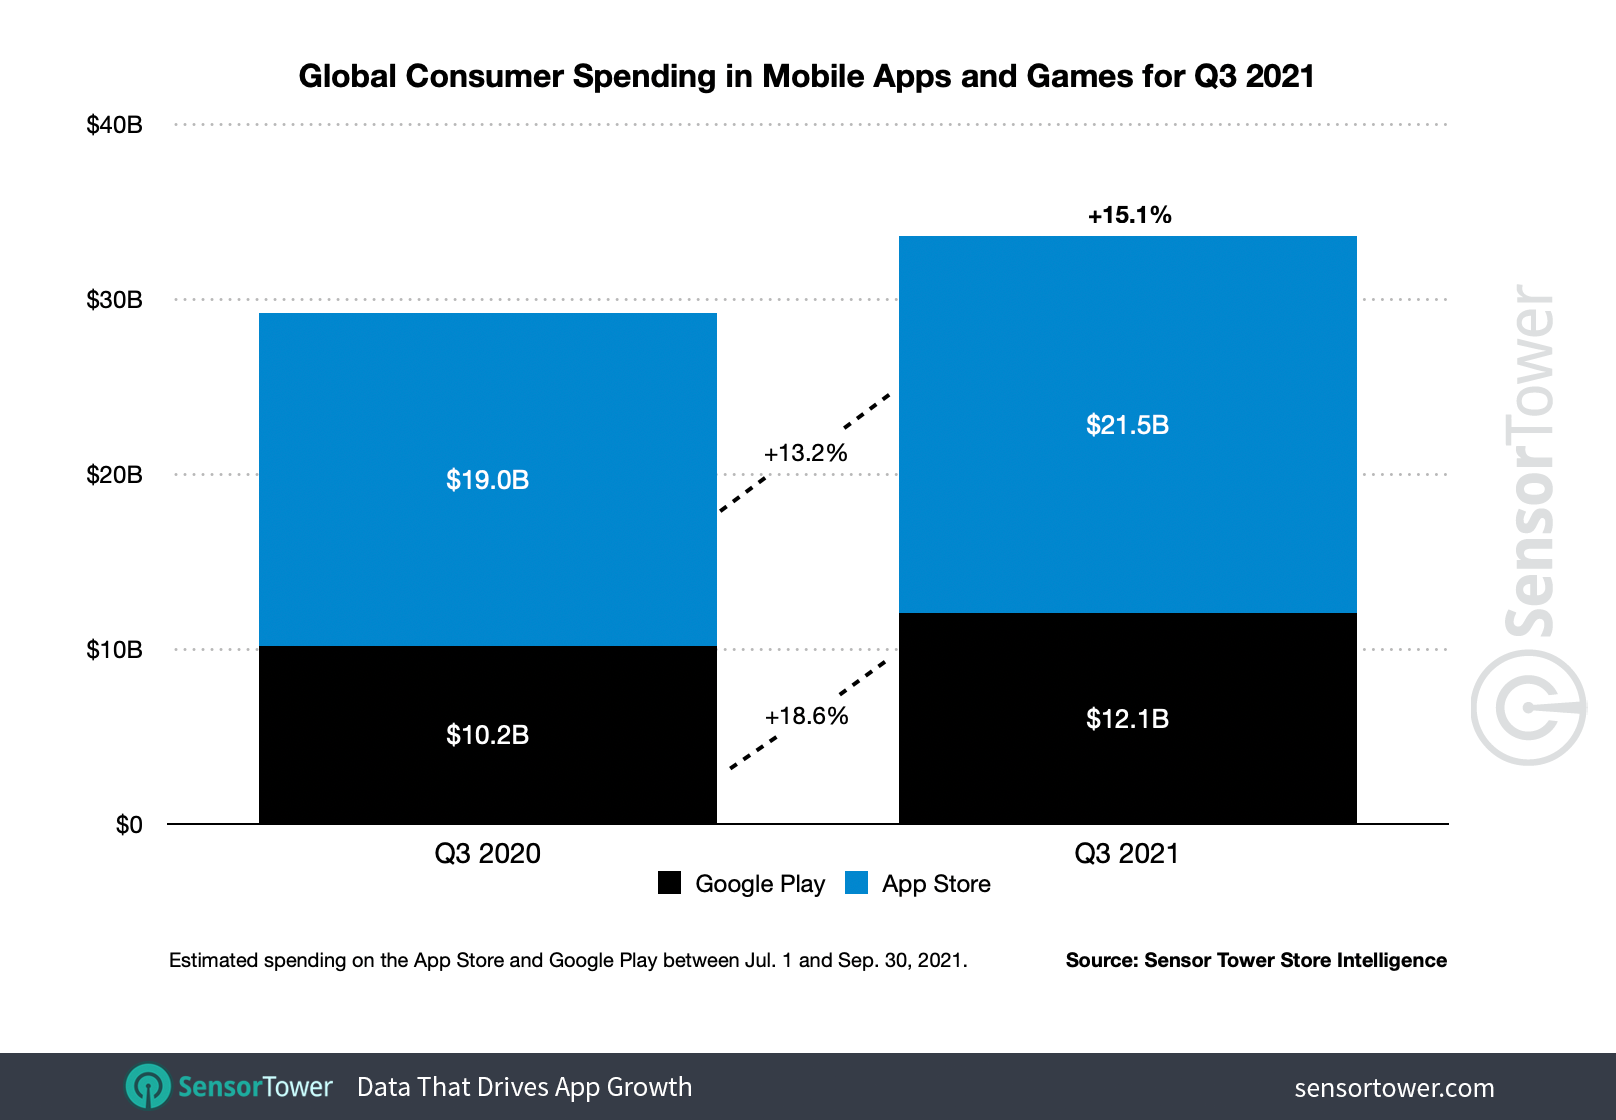 Worldwide consumer spending on apps grew 15.1 percent year-over-year to $33.6 billion in 3Q21.